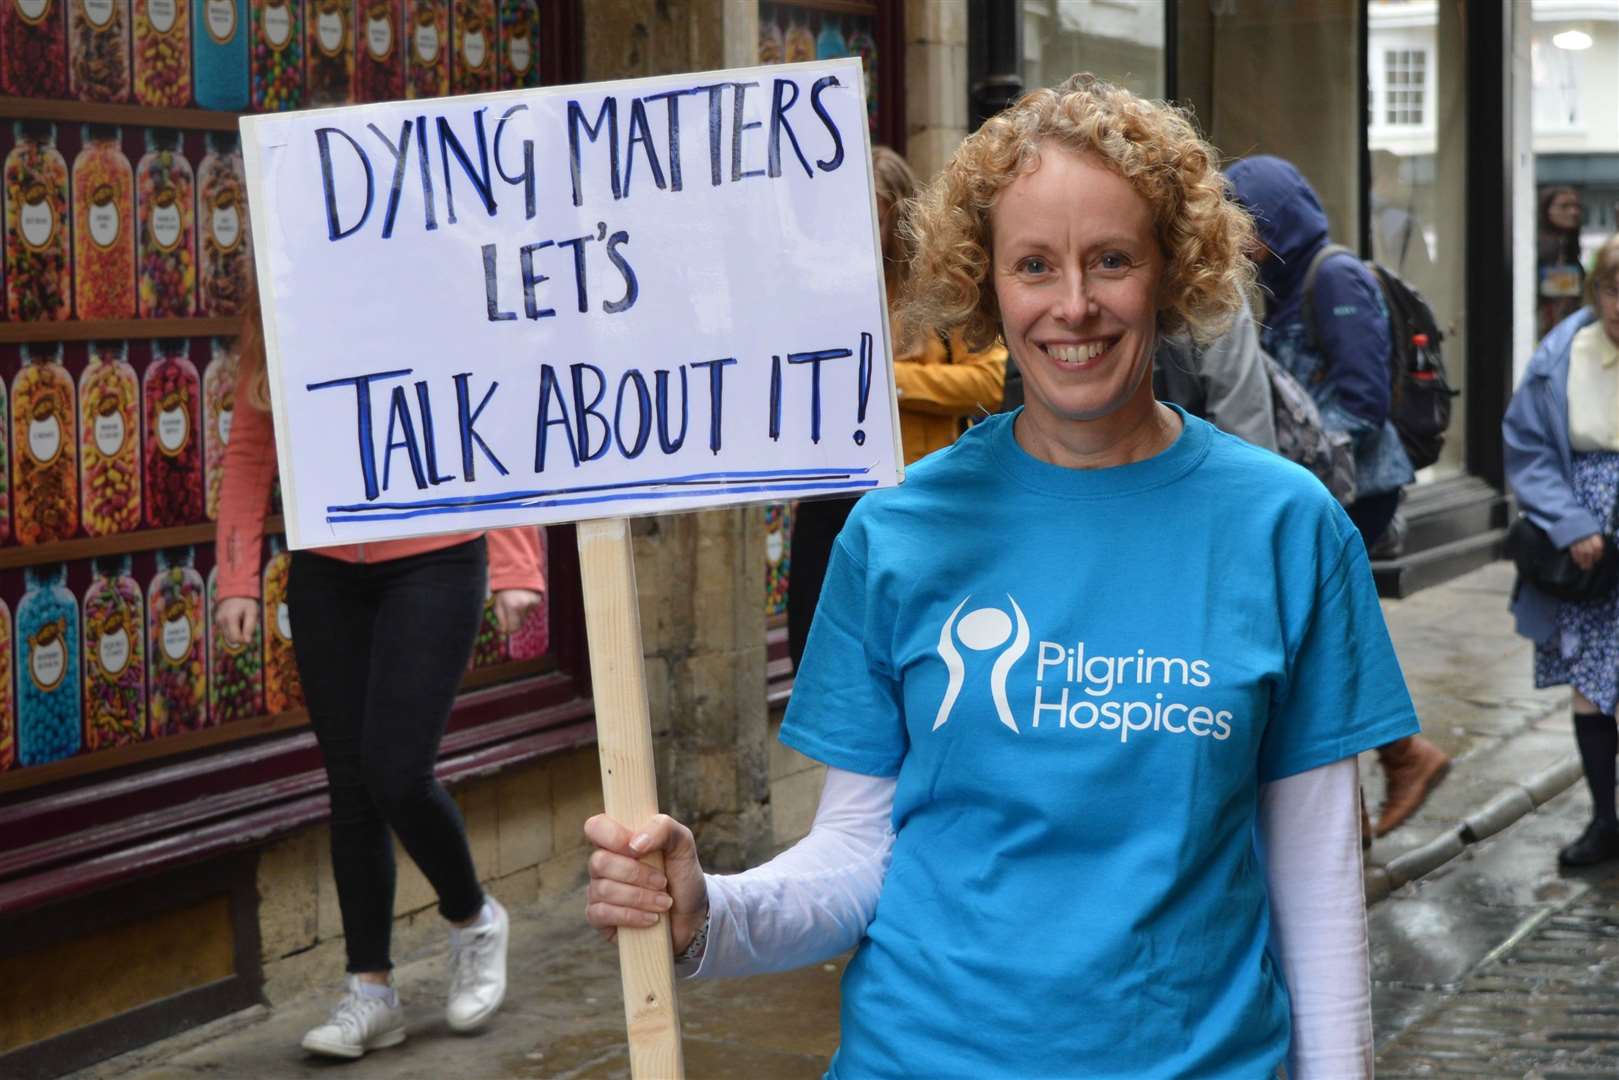 It is part of the Pilgrims Hospice Dying Matters Campaign